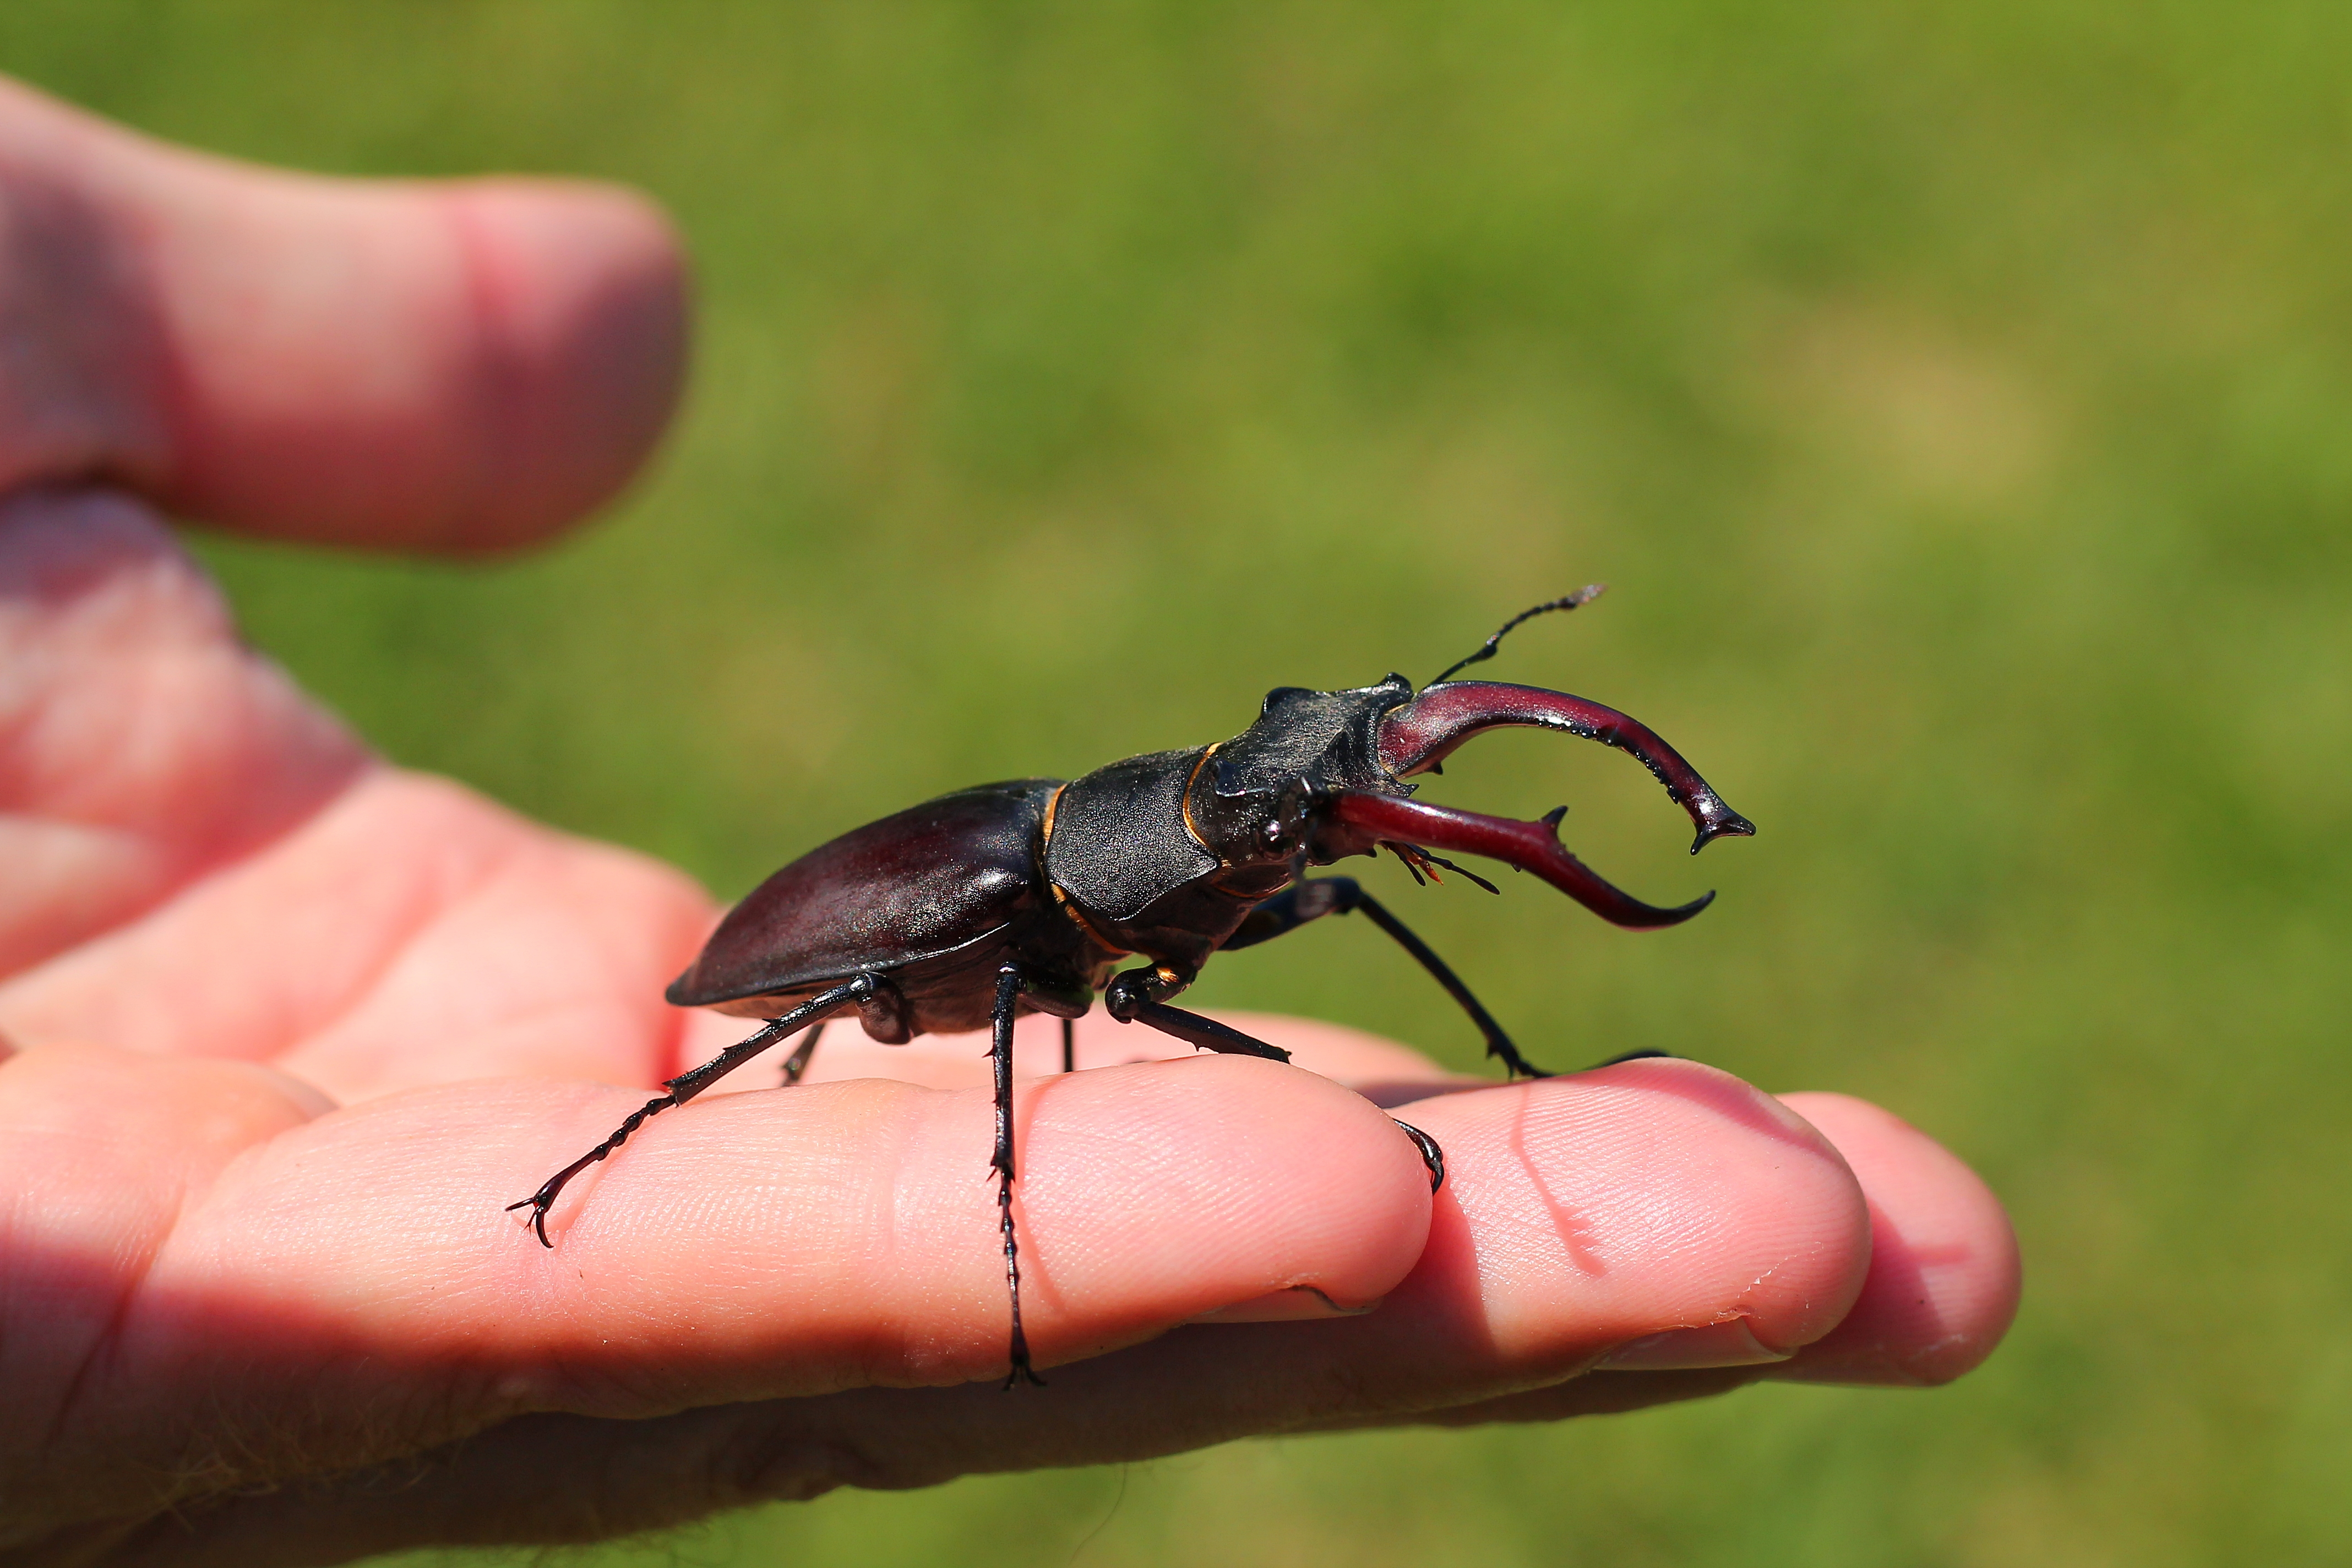 The Harmless Yet Spectacular Stag Beetle | Familia Torres